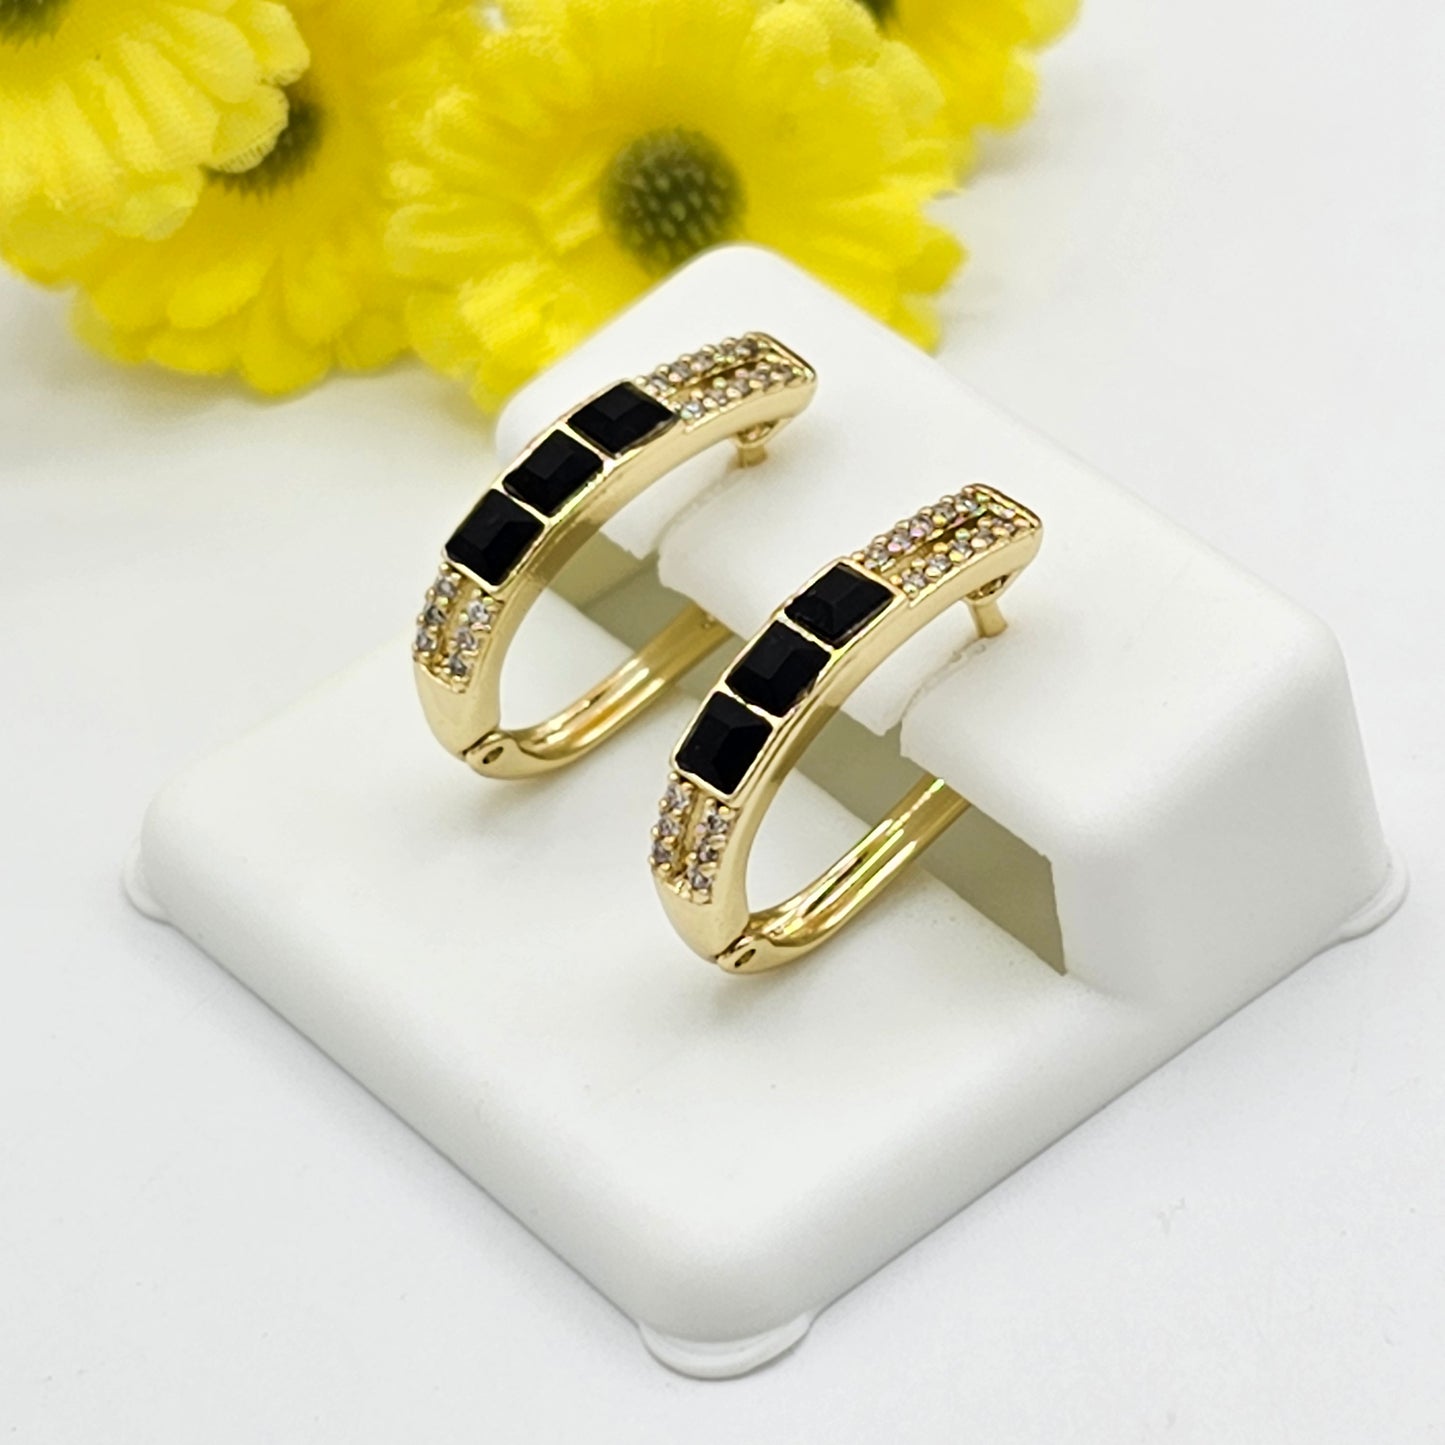 Earrings - 14K Gold Plated. Black & Clear Crystal Oval Hoops.